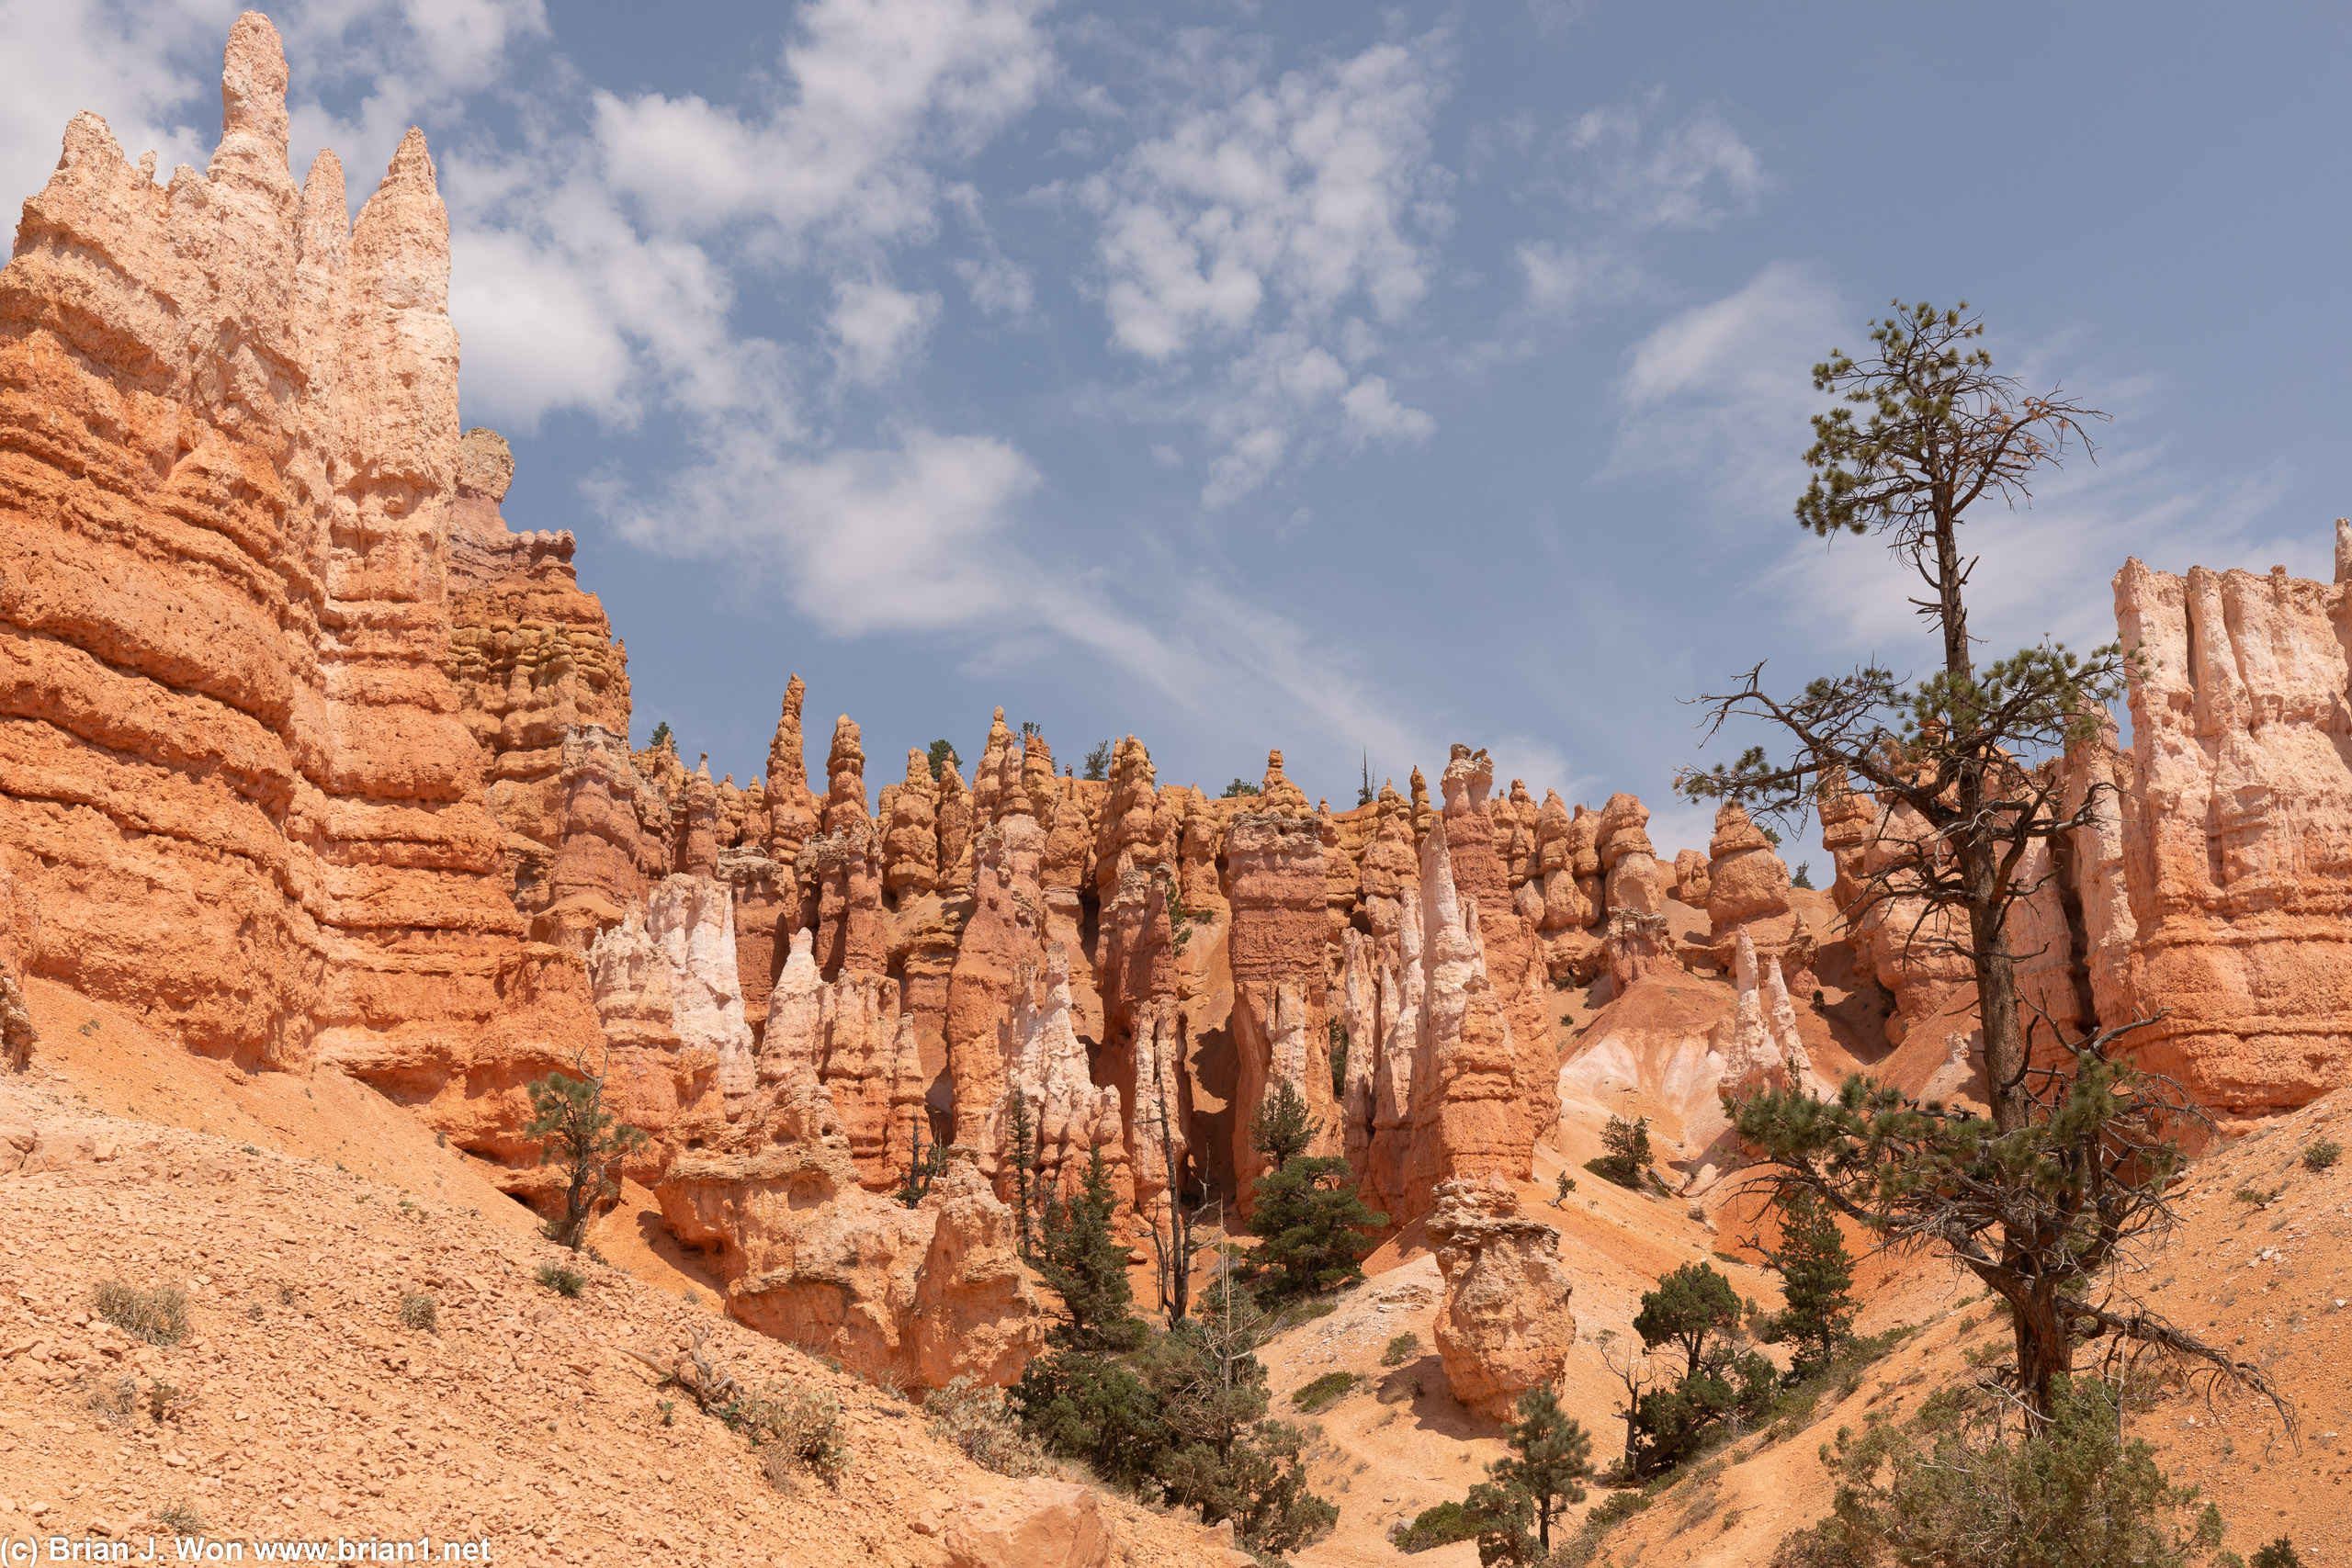 Bryce Canyon Ampitheater, you do not mess around.